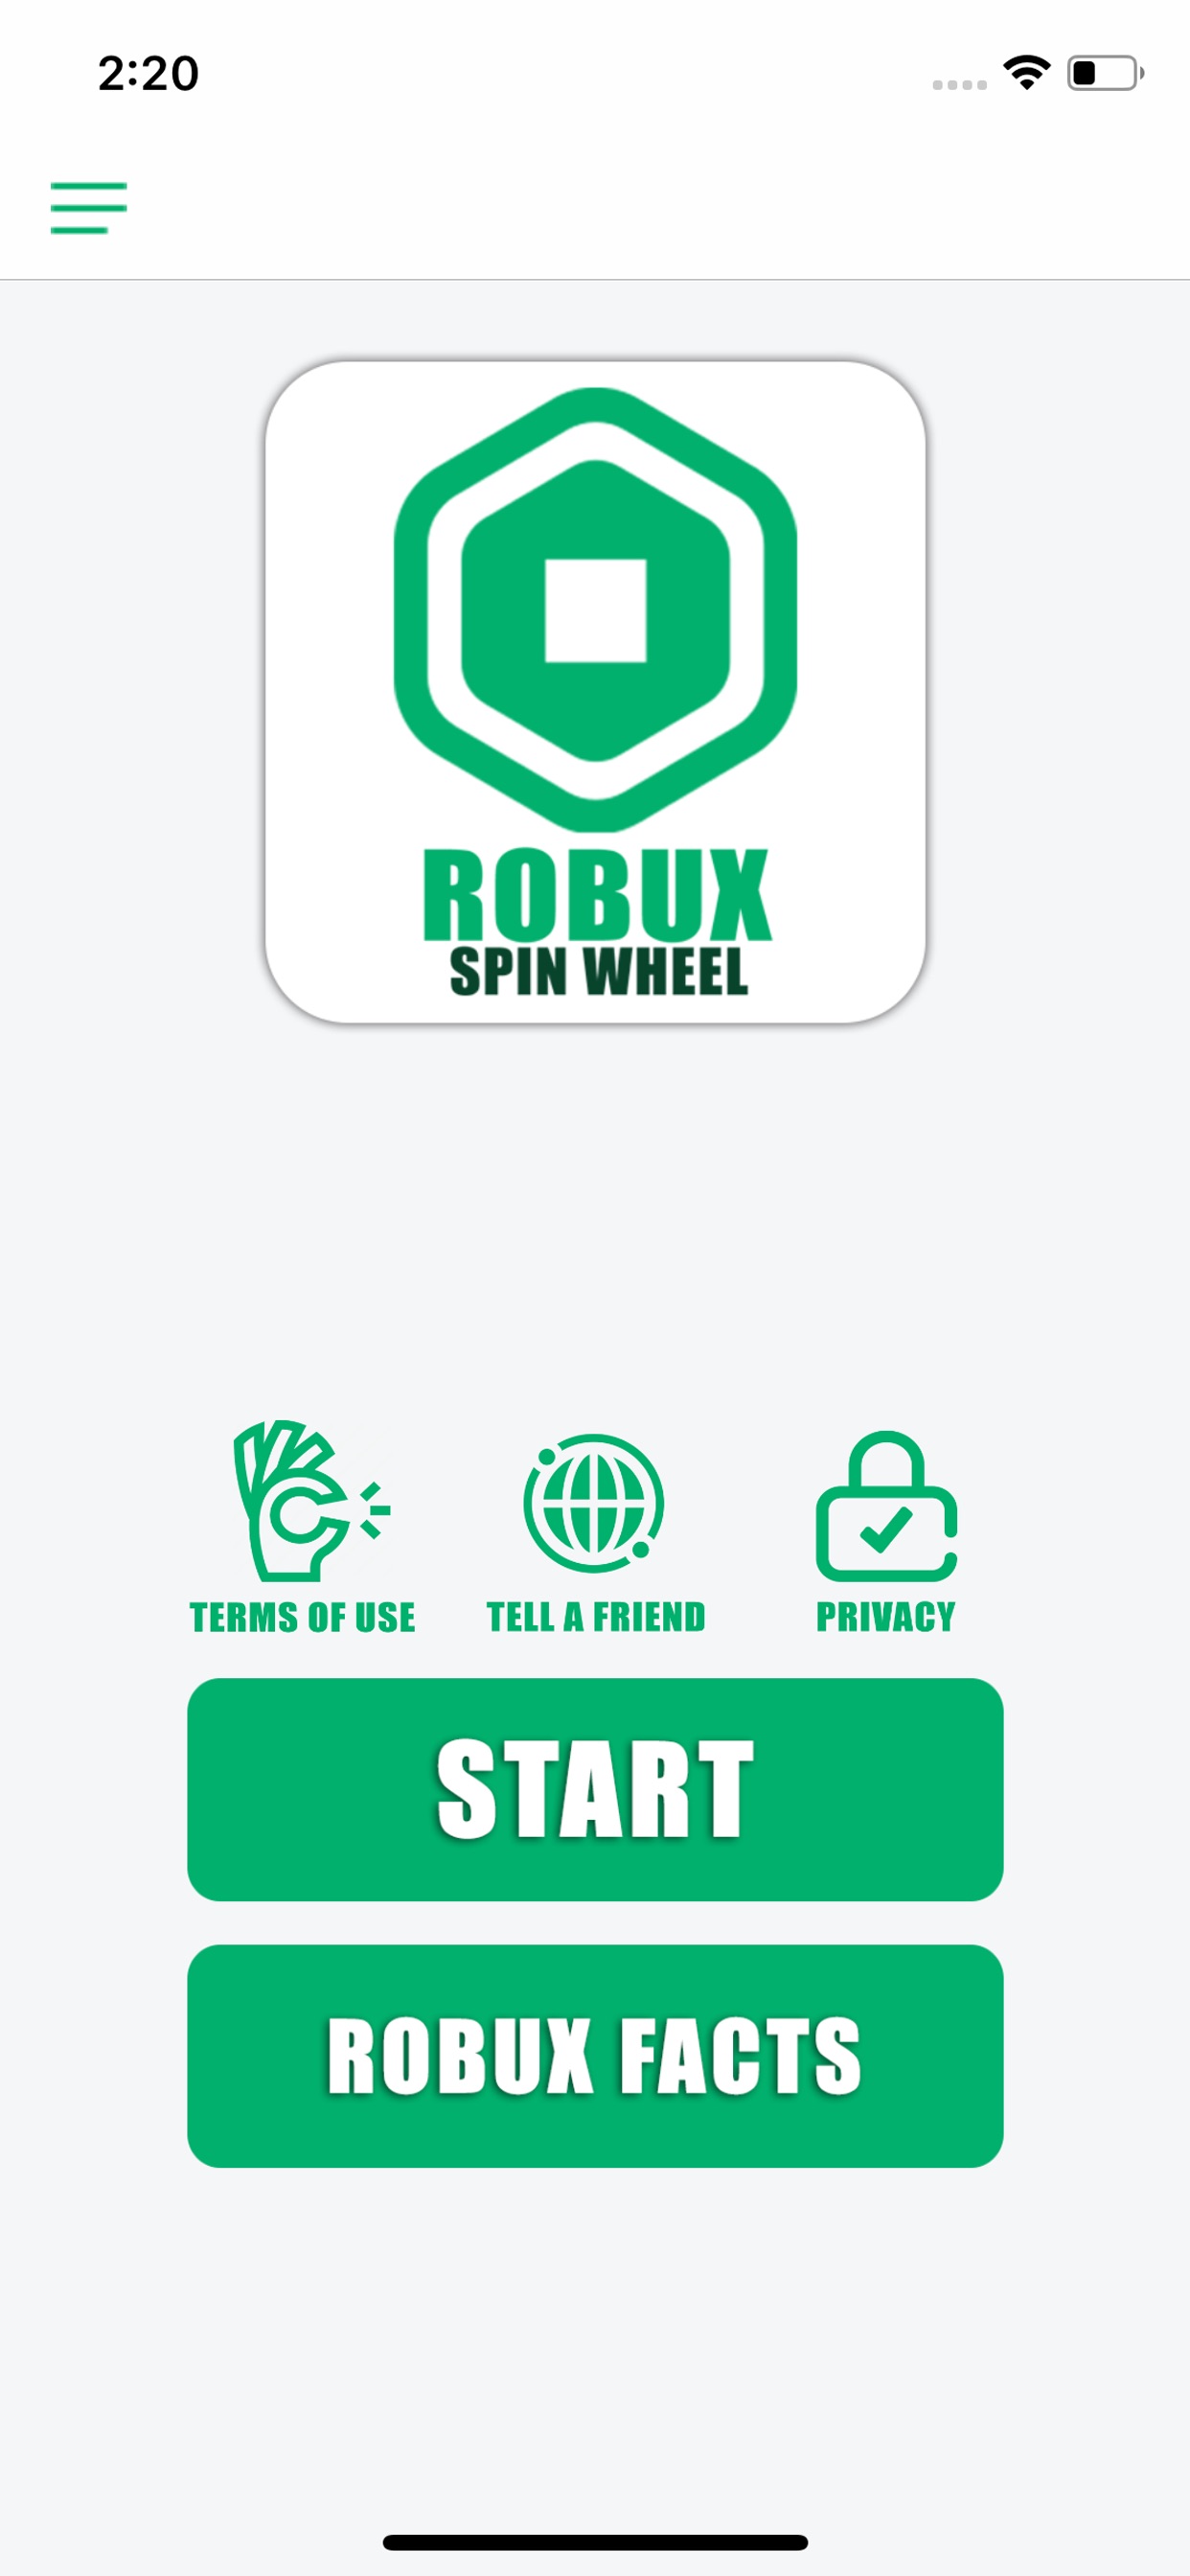 Eyk7x Aivkunkm - robux codes for roblox app store review aso revenue downloads appfollow